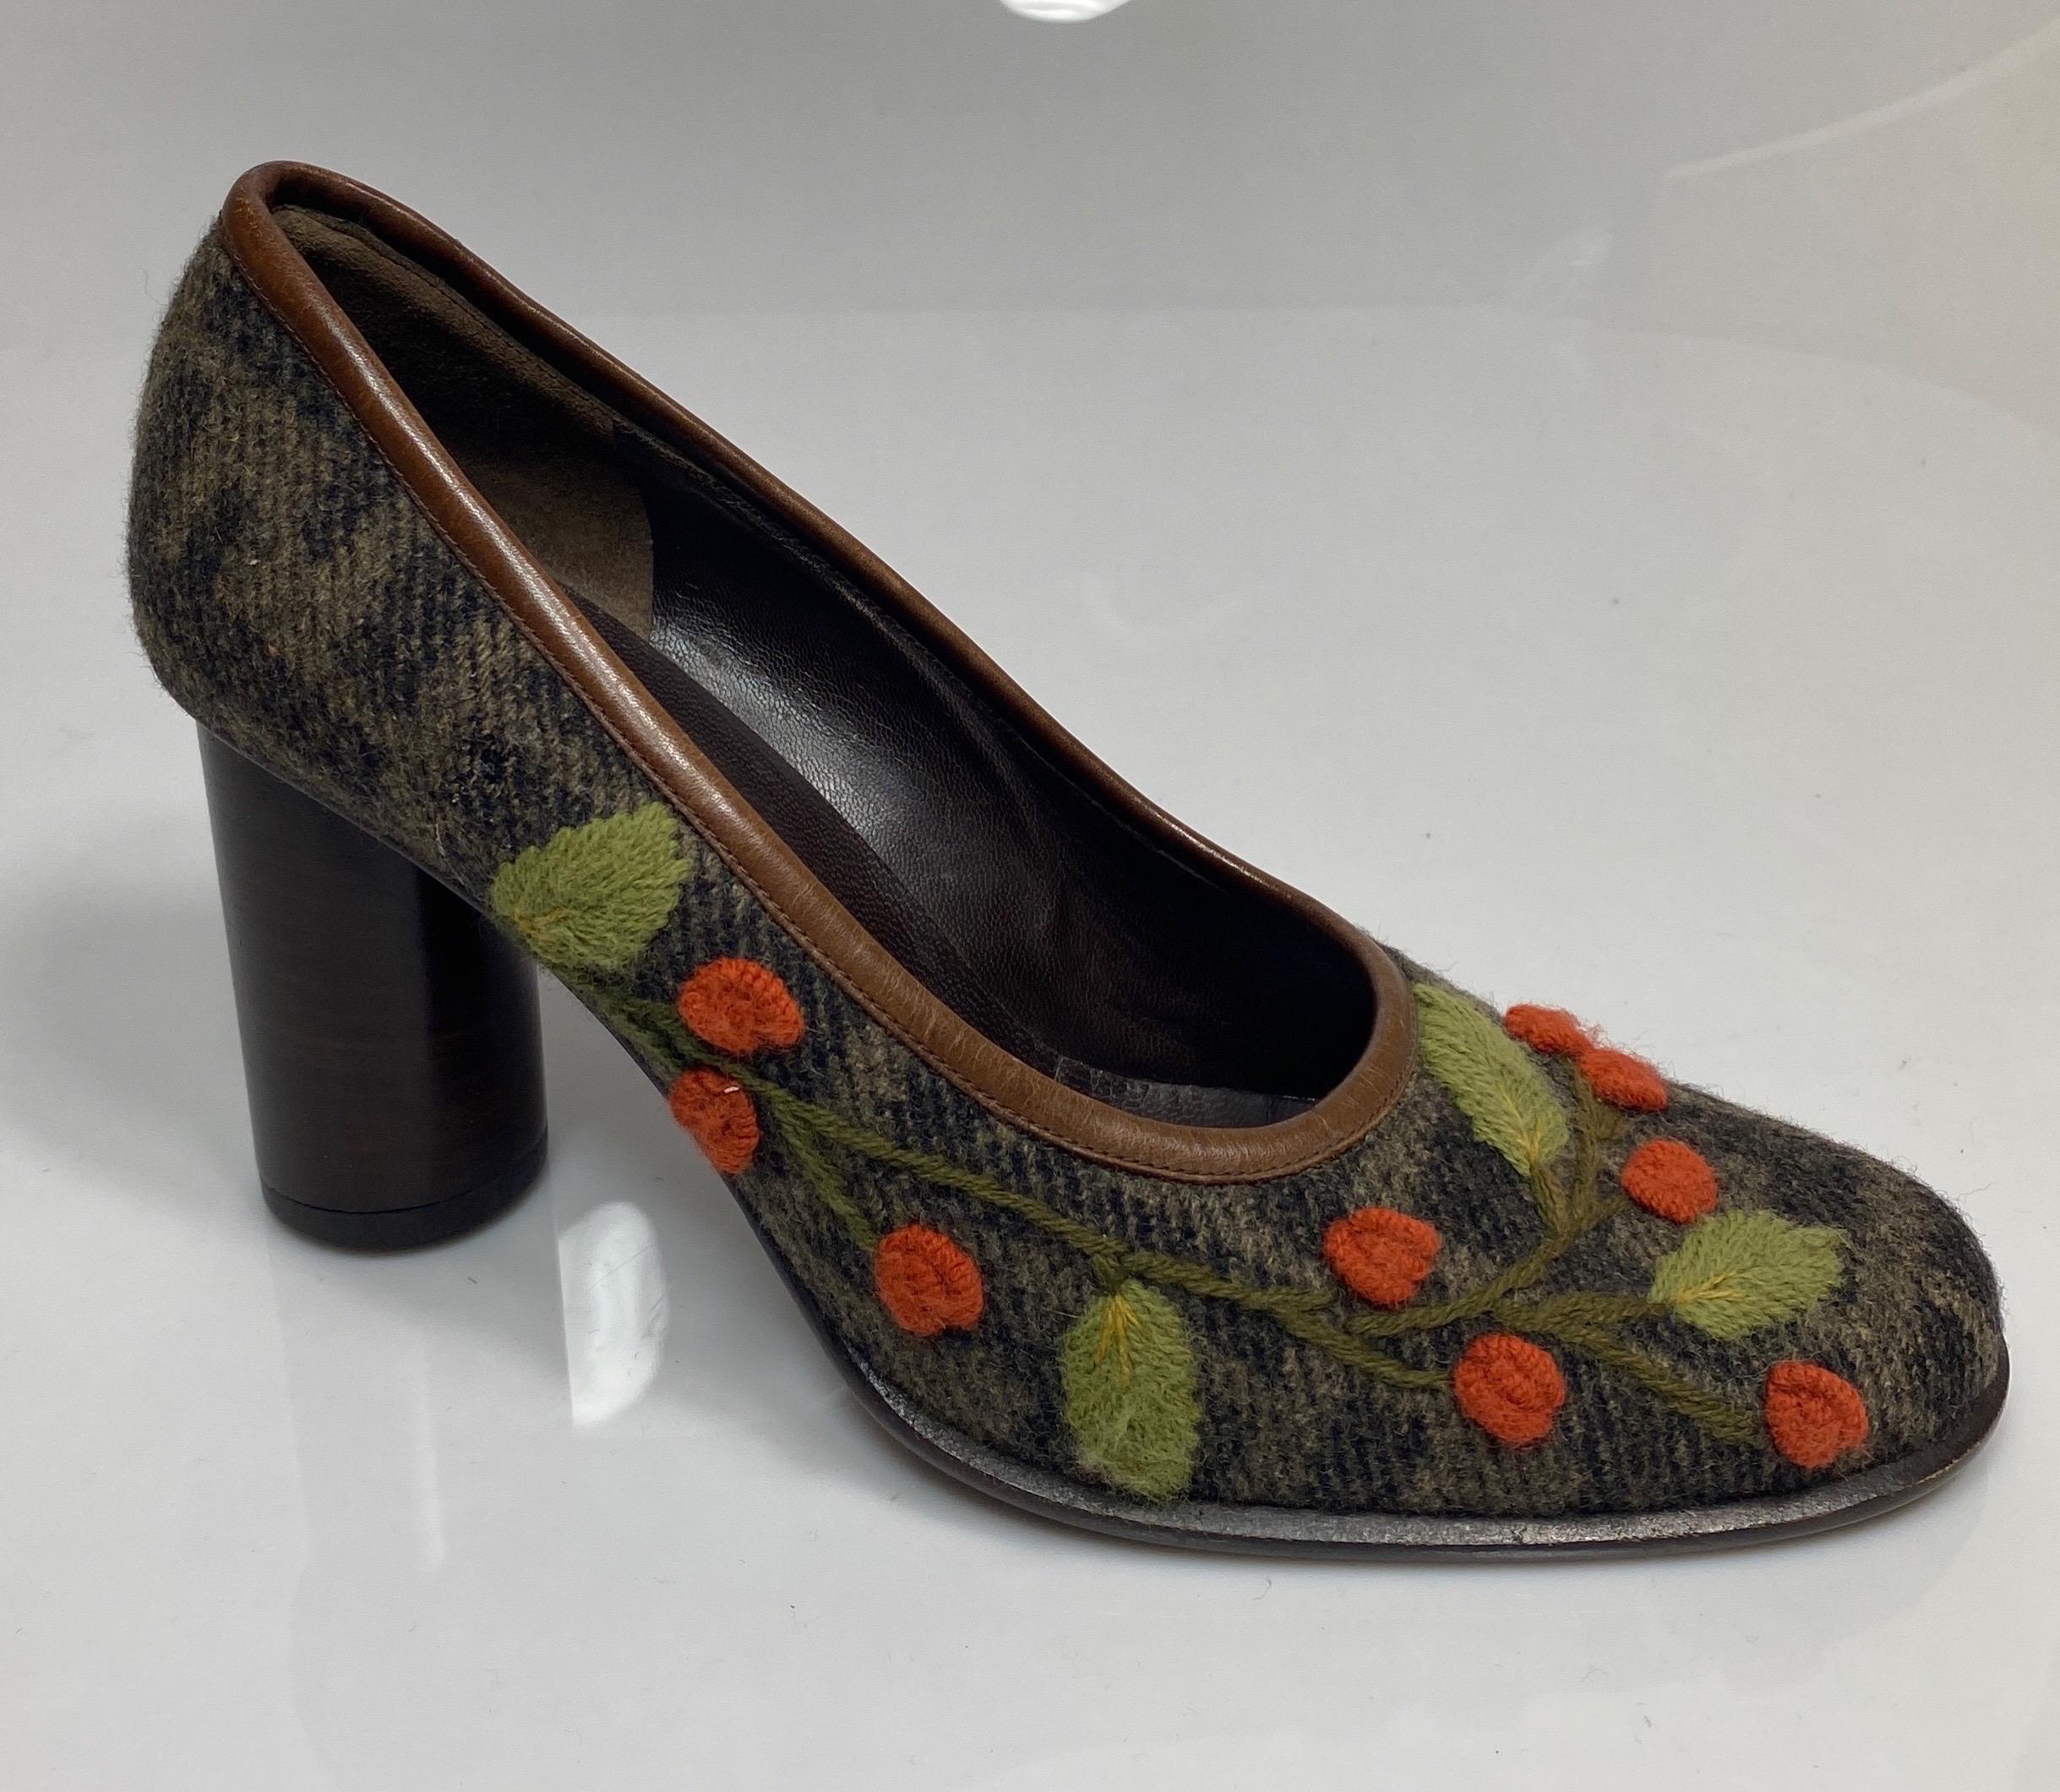 Fendi Logo Print Wool Embroidered Pump - Size 5.5 
Description:
Vintage
Leather interior and piping
Wool logo fabric
Embroidered Leaf and flower Red and Olive colors
1.5” wide
3.5” Round Woodstack heel
Very good condition